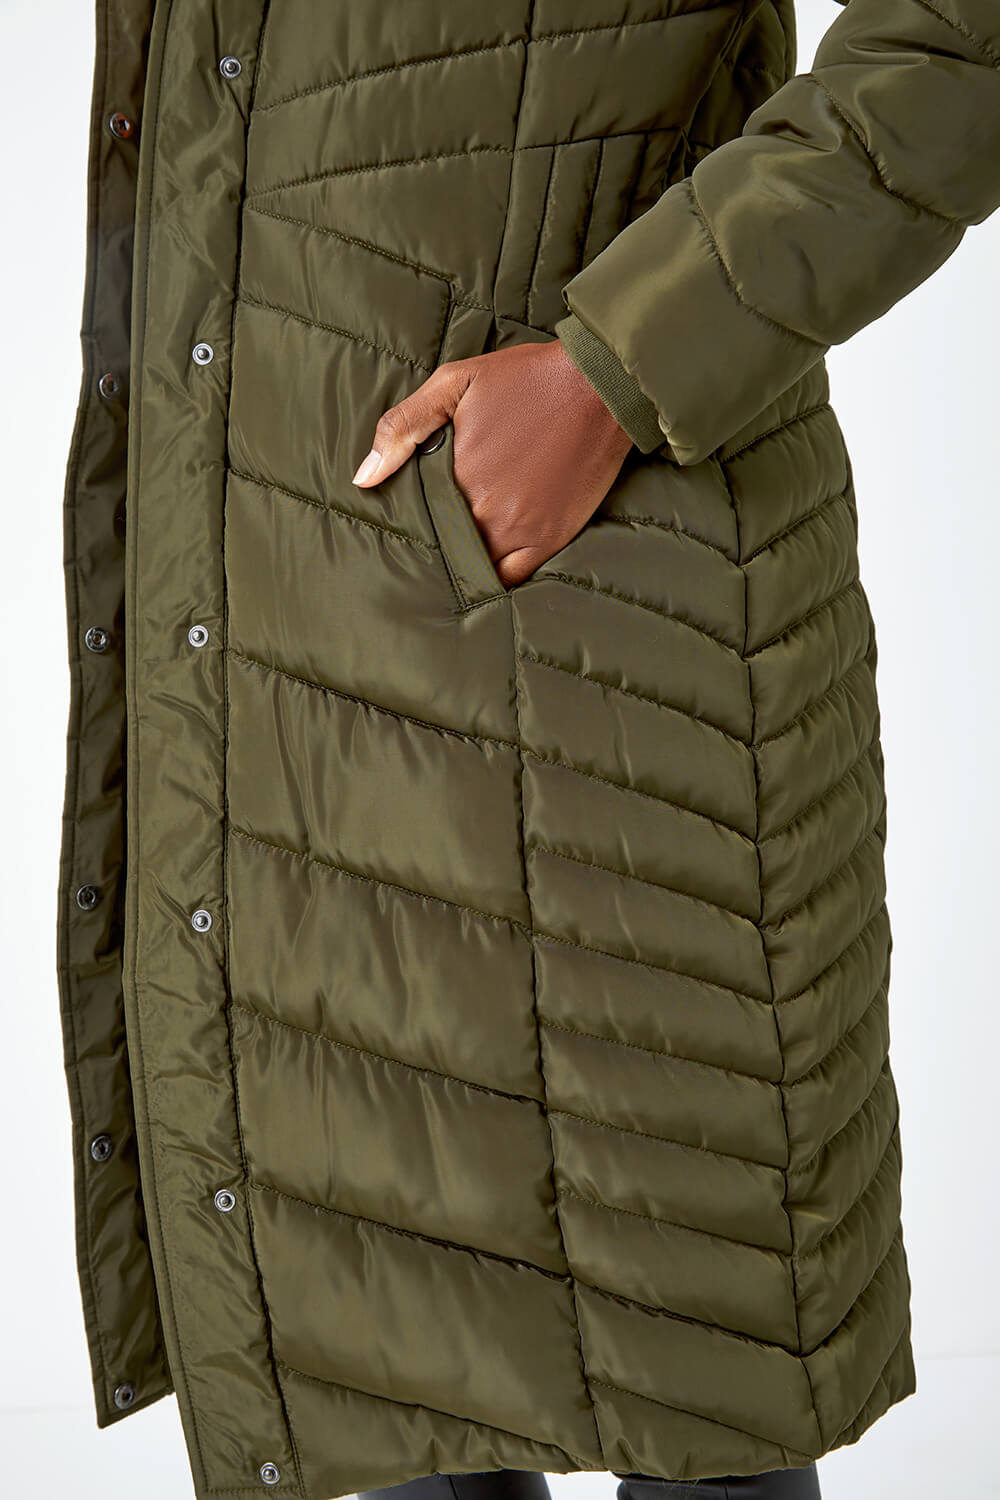 KHAKI Hooded Quilted Longline Coat, Image 5 of 5